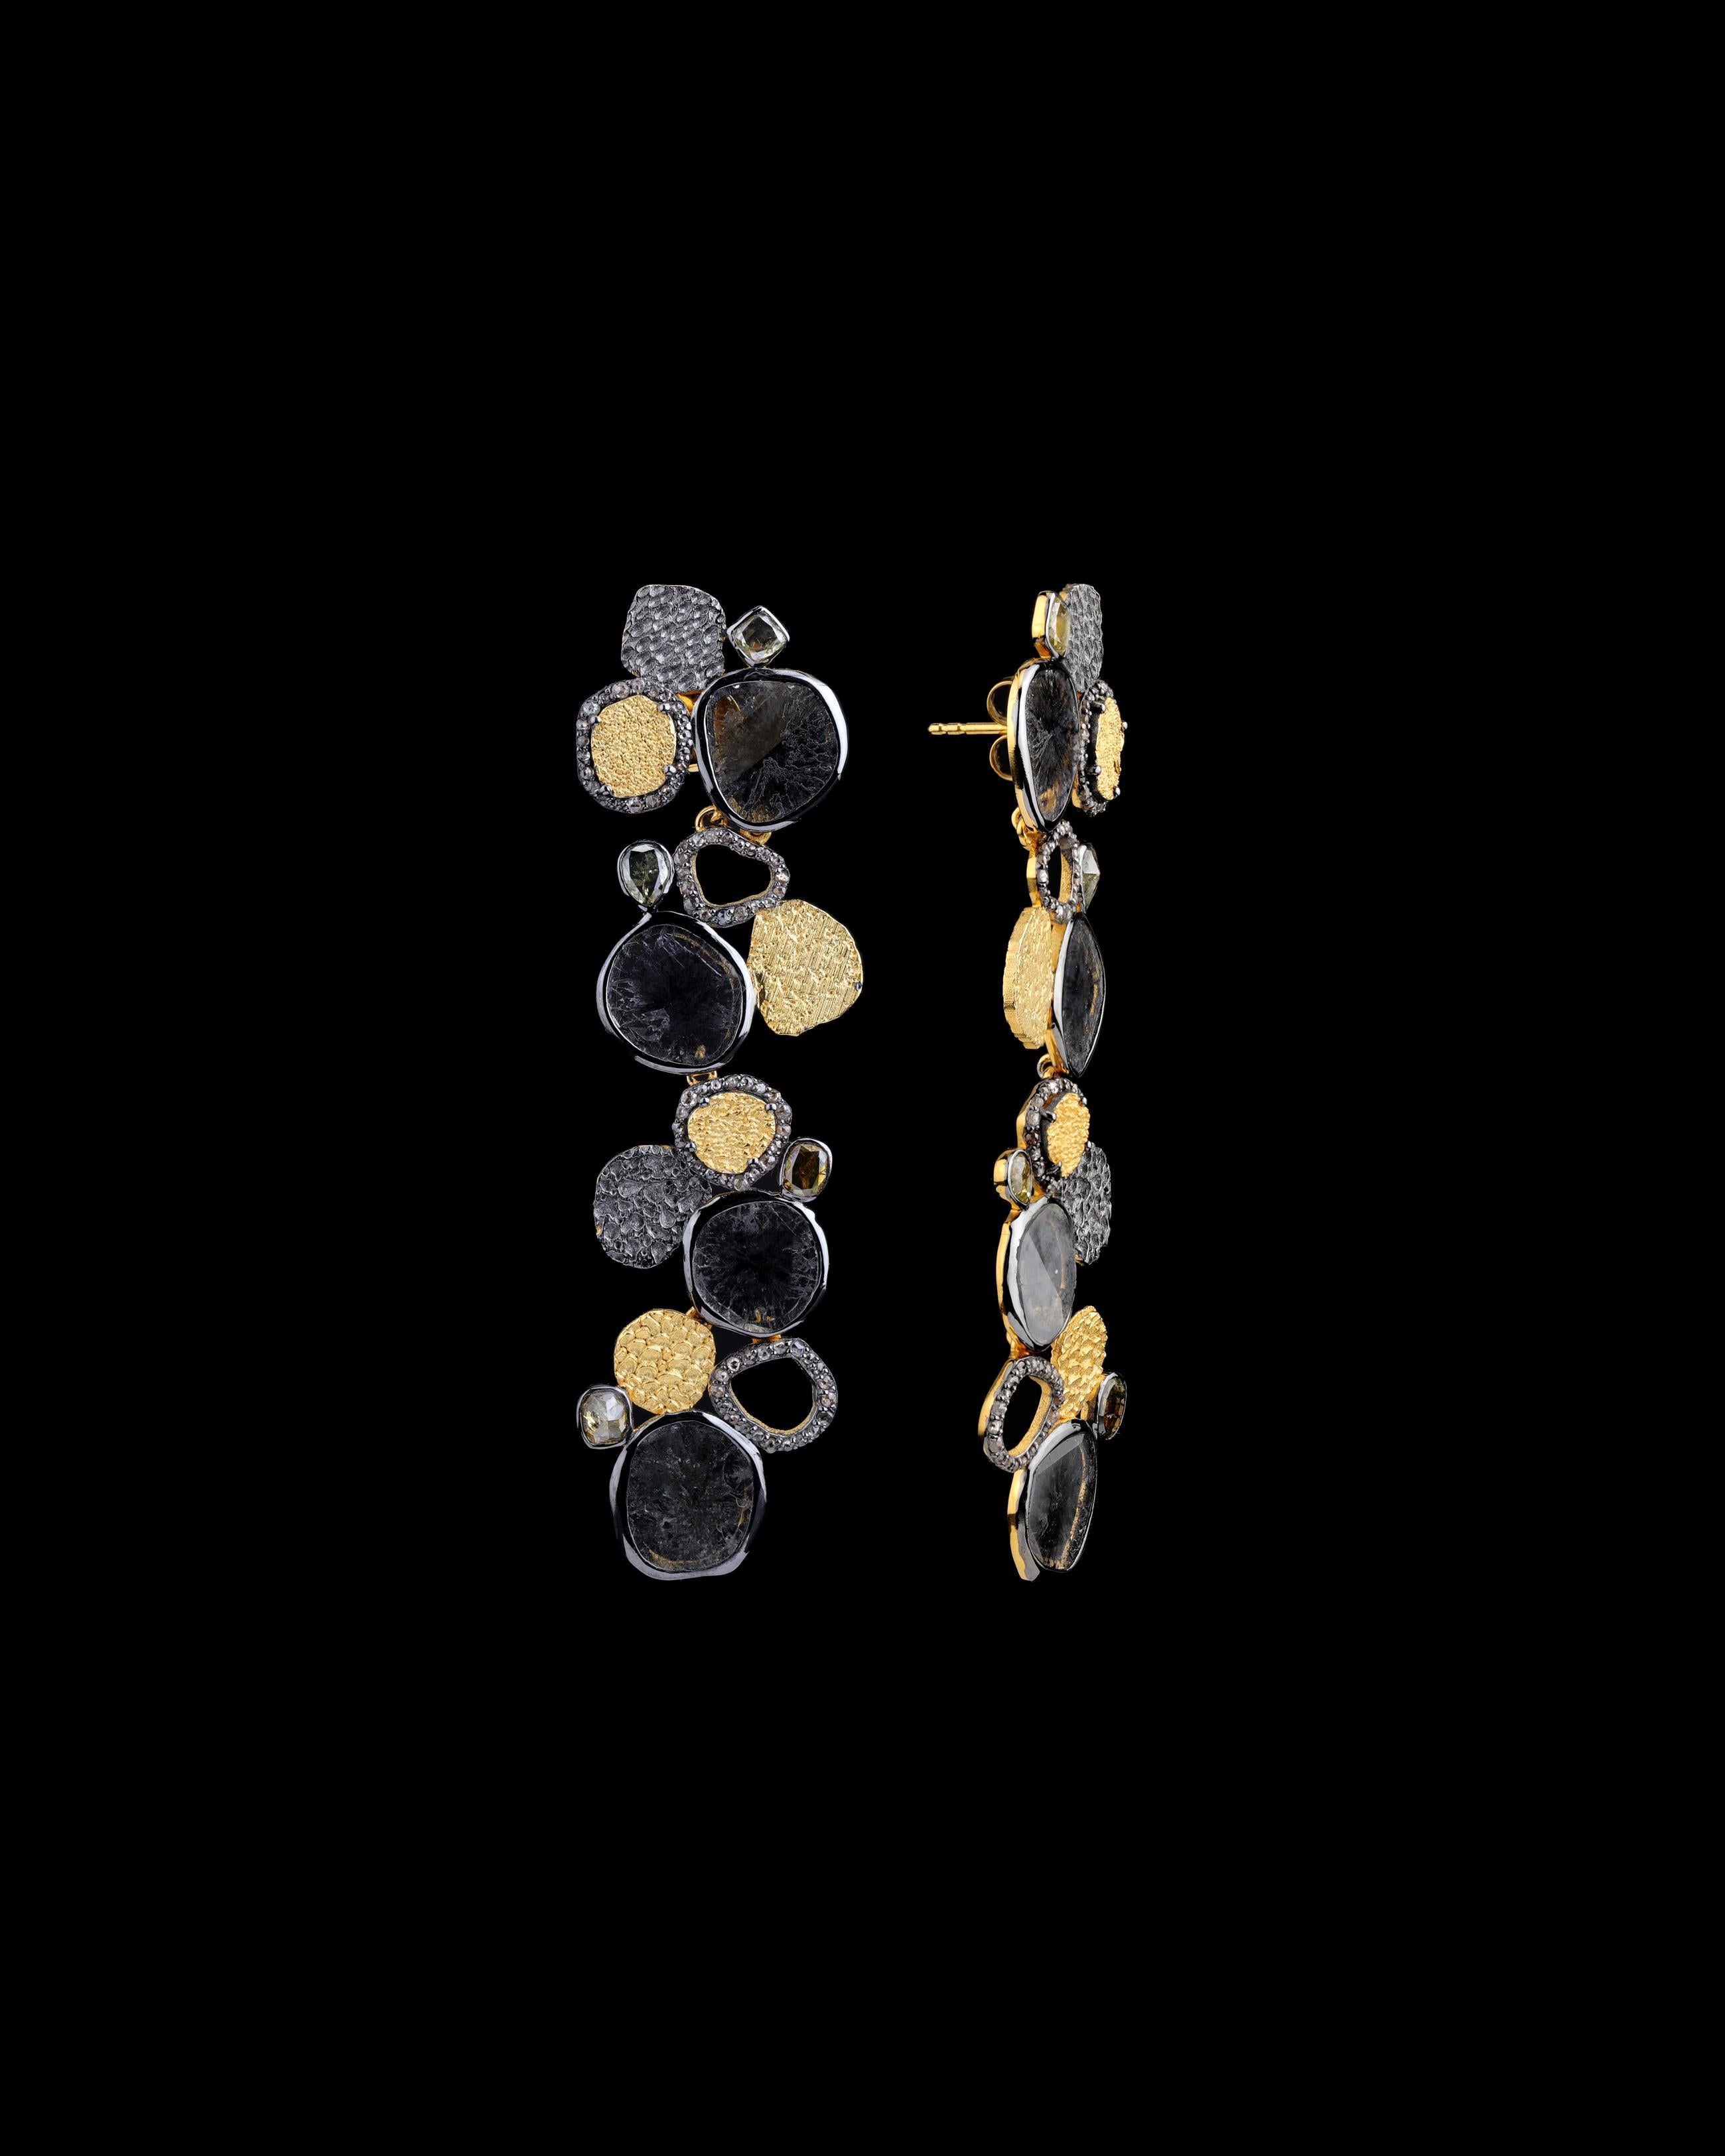 This remarkable piece of jewelry is more than just an earring; it’s the embodiment of an extraordinary love story that defies all odds. Each element of this earring has been intricately designed to tell a compelling tale of true love’s incredible